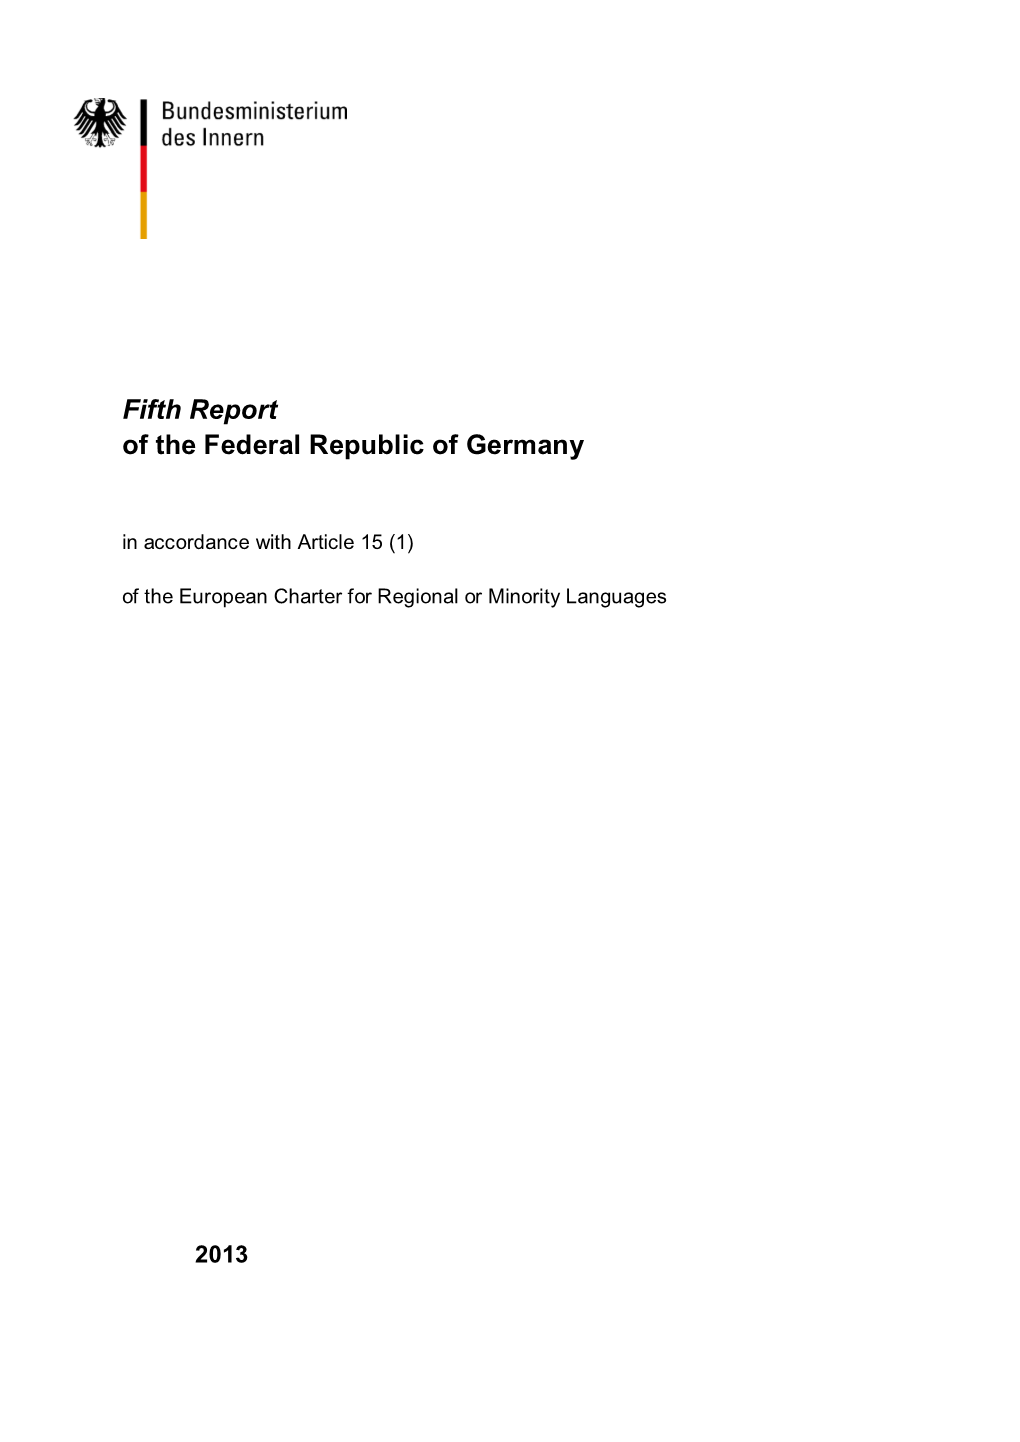 Fifth Report of the Federal Republic of Germany